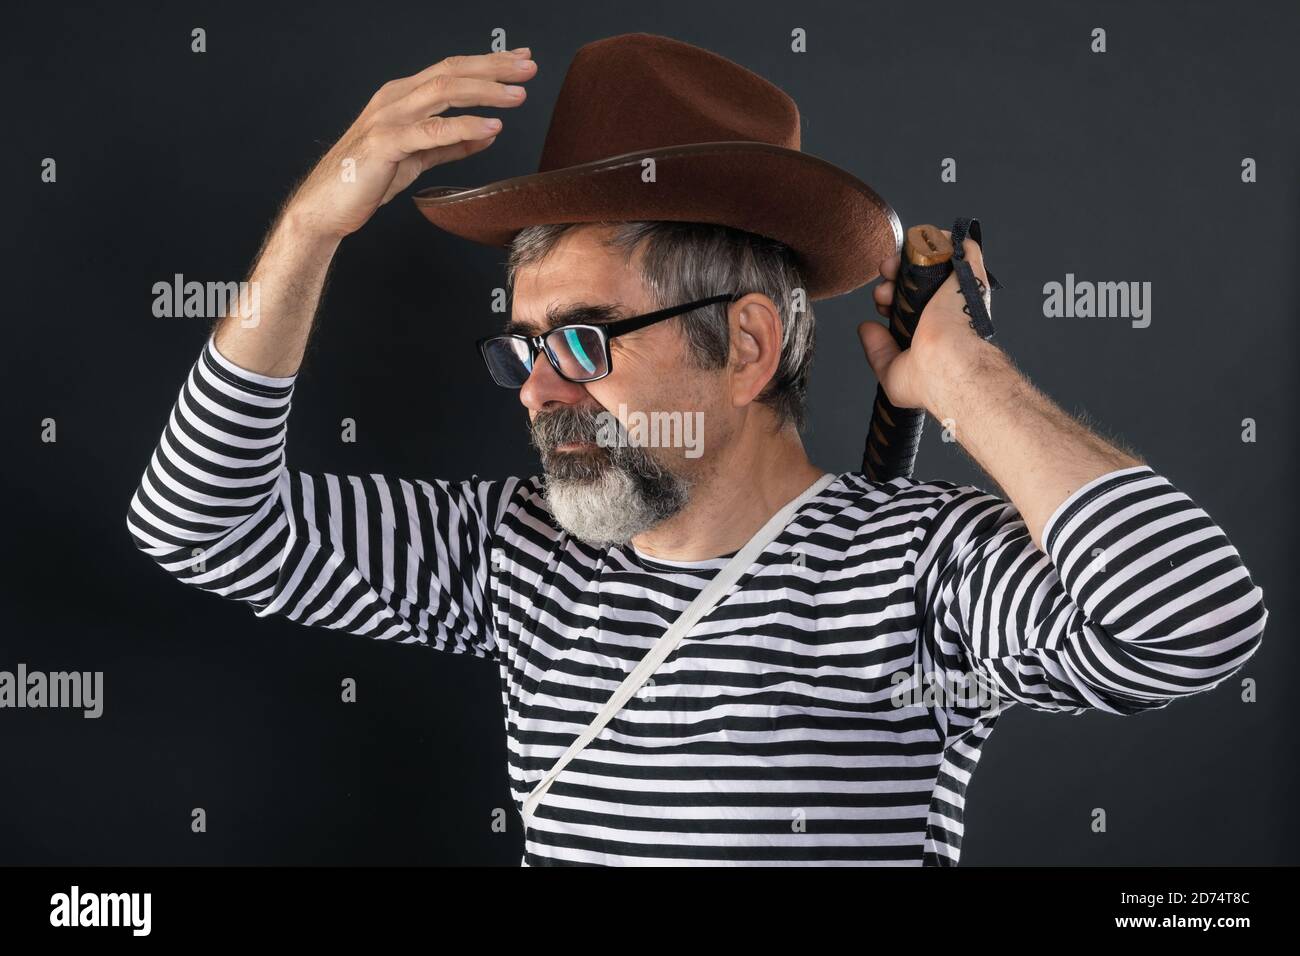 Elderly man fooling around and playing the role of a crazy pirate Stock Photo